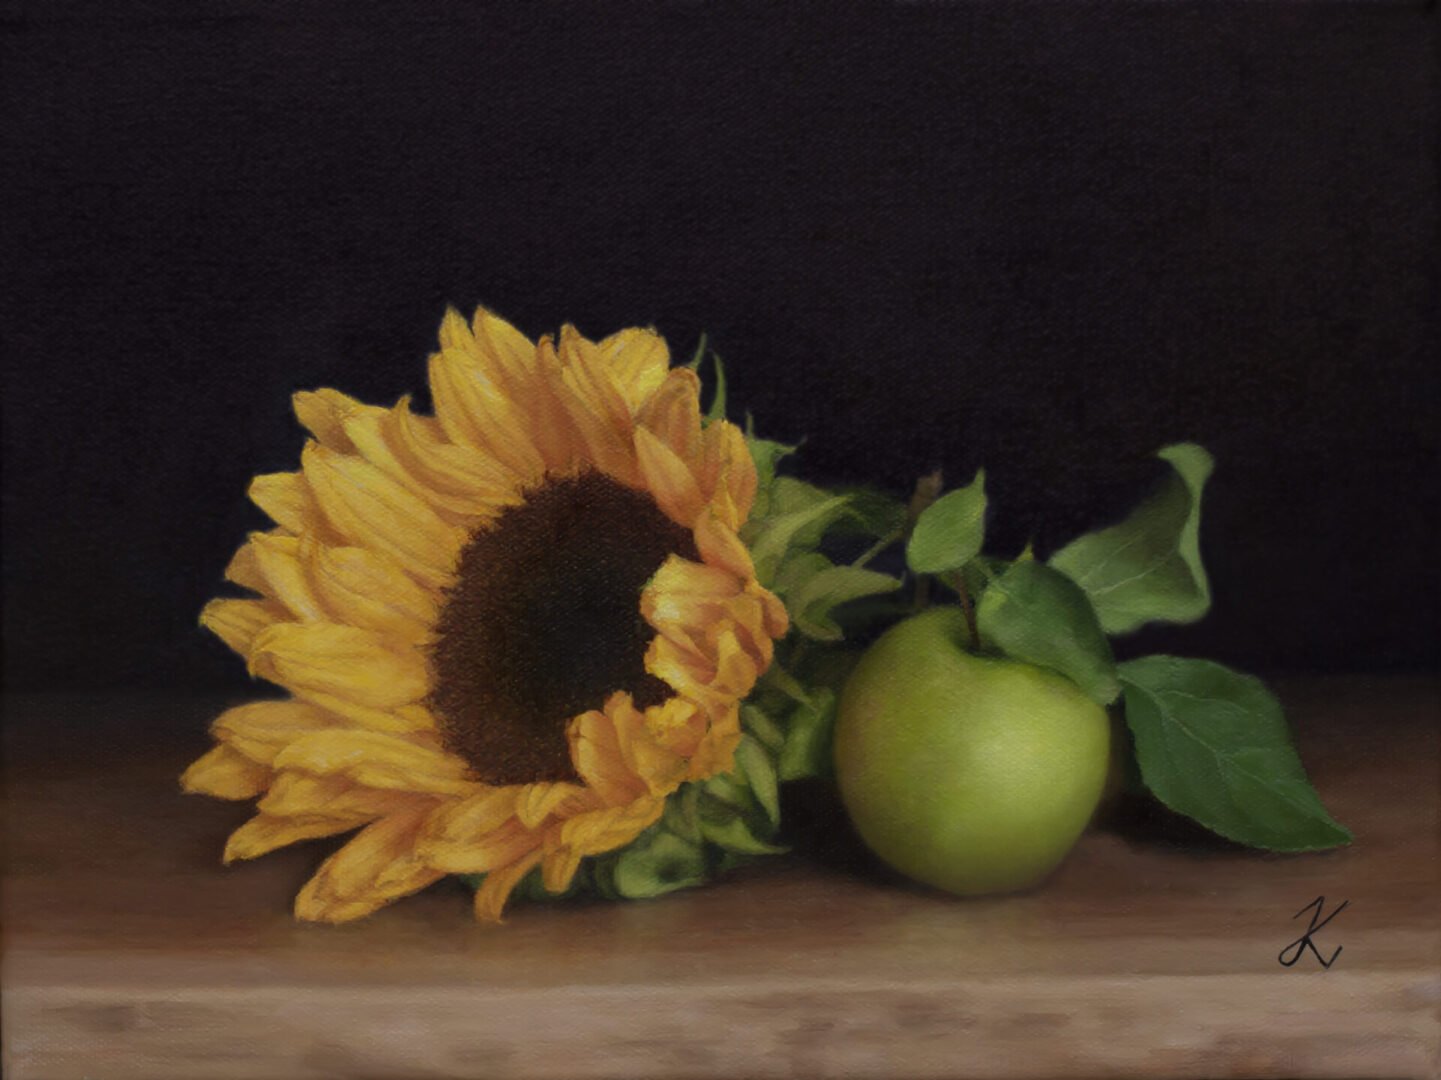 A sunflower and apple on a table.